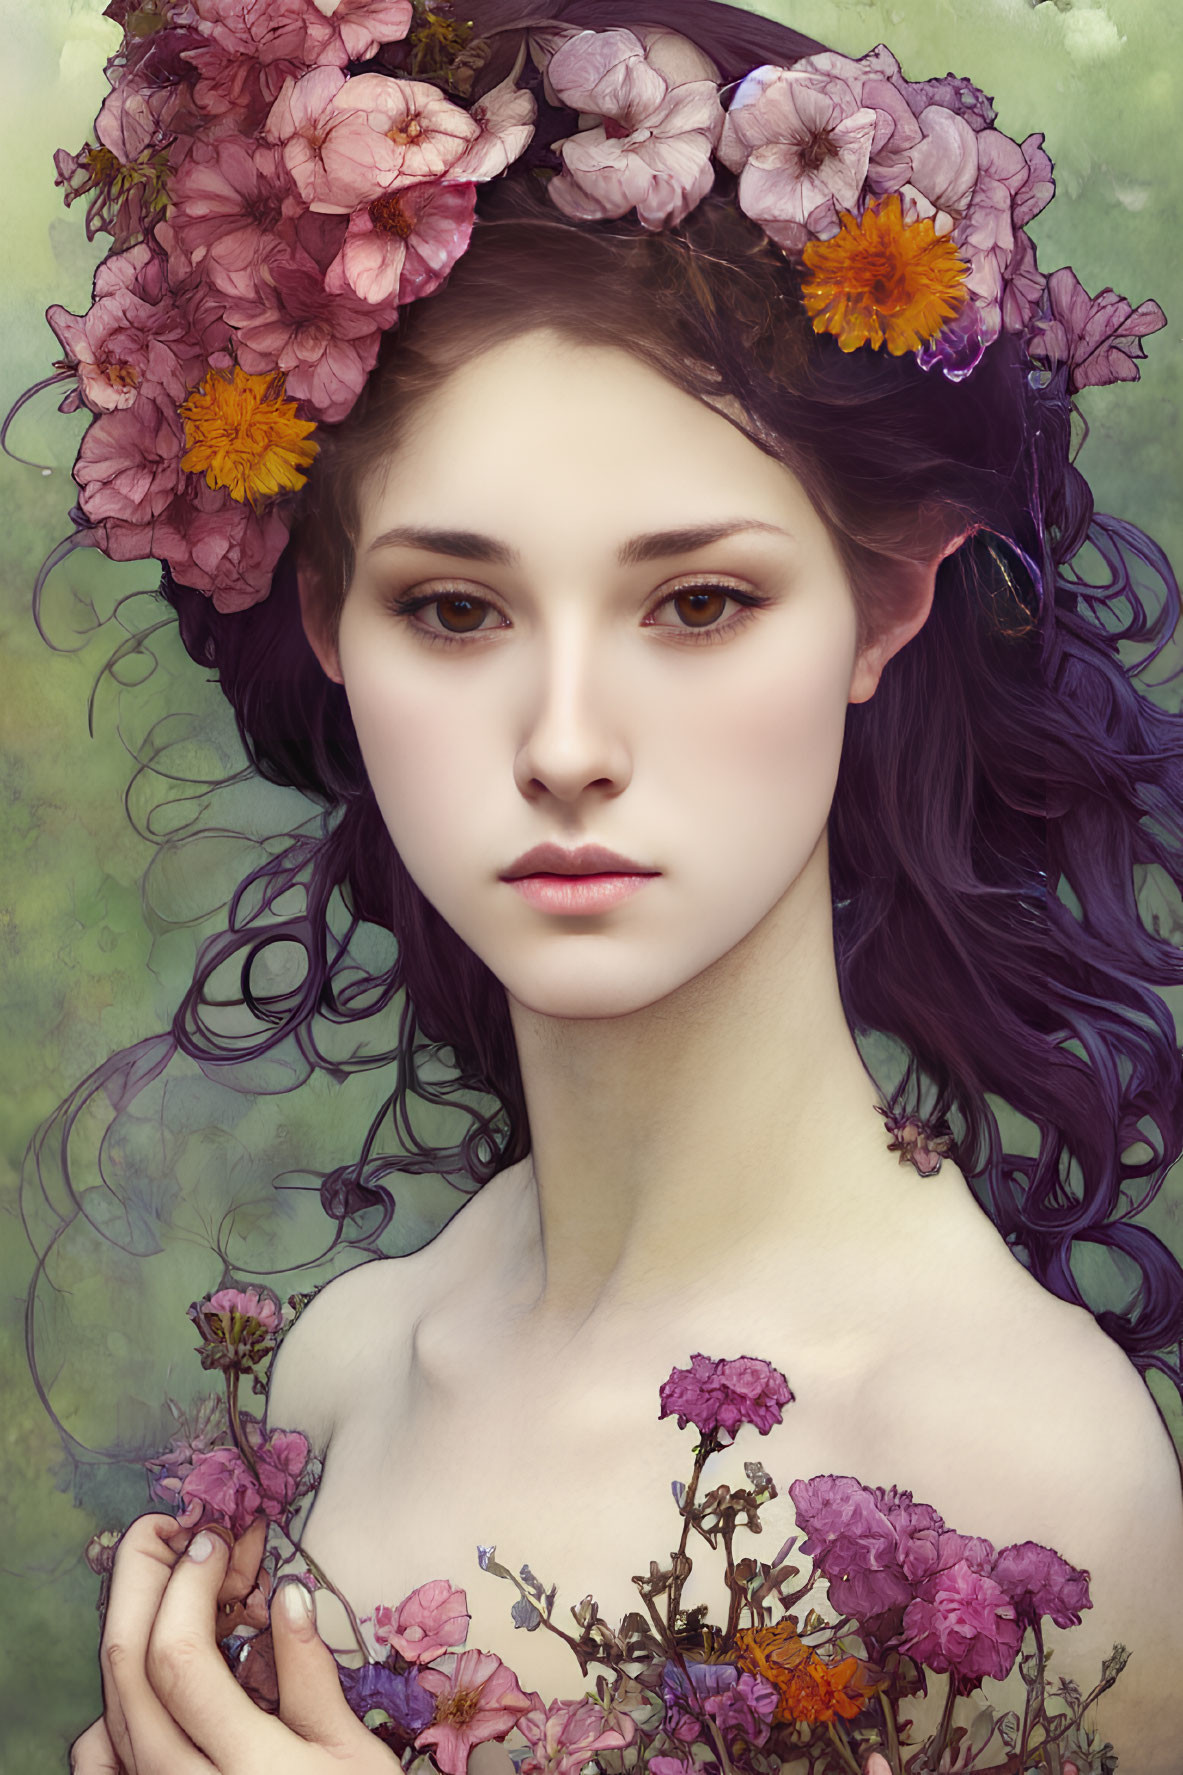 Purple-haired person with floral crown holding blossom on green background